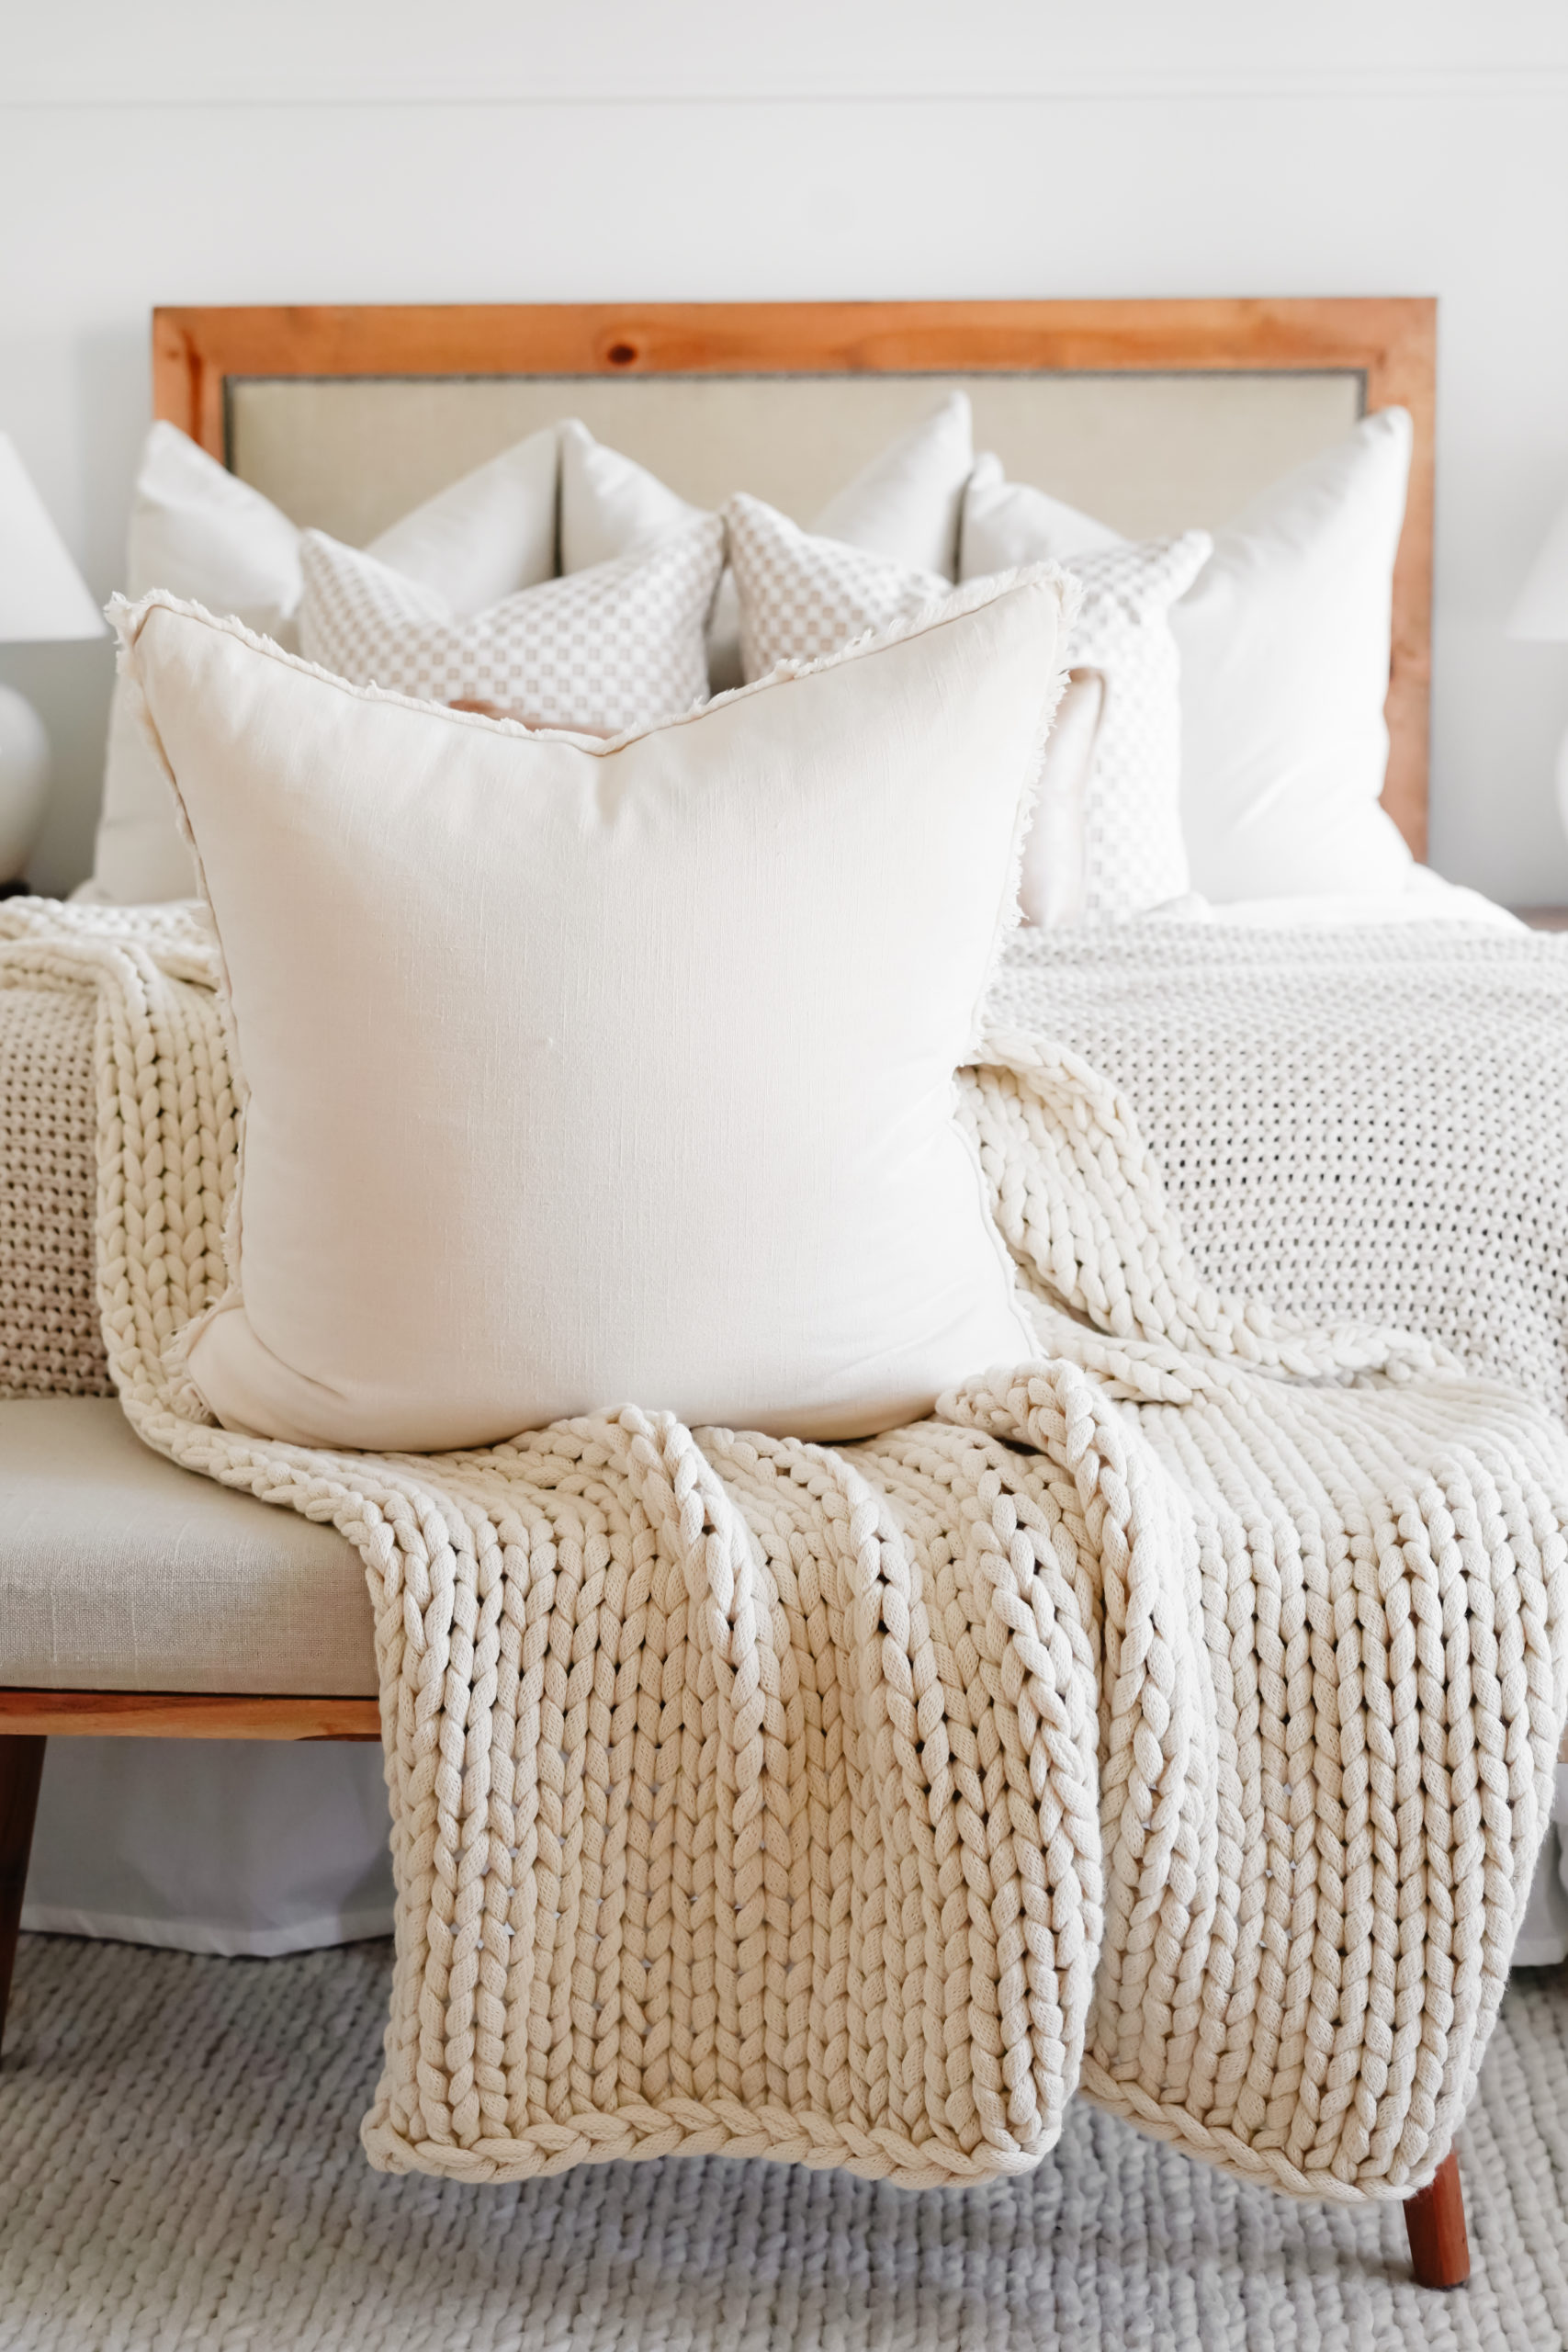 THE BEST PILLOW INSERTS - Red White & Denim